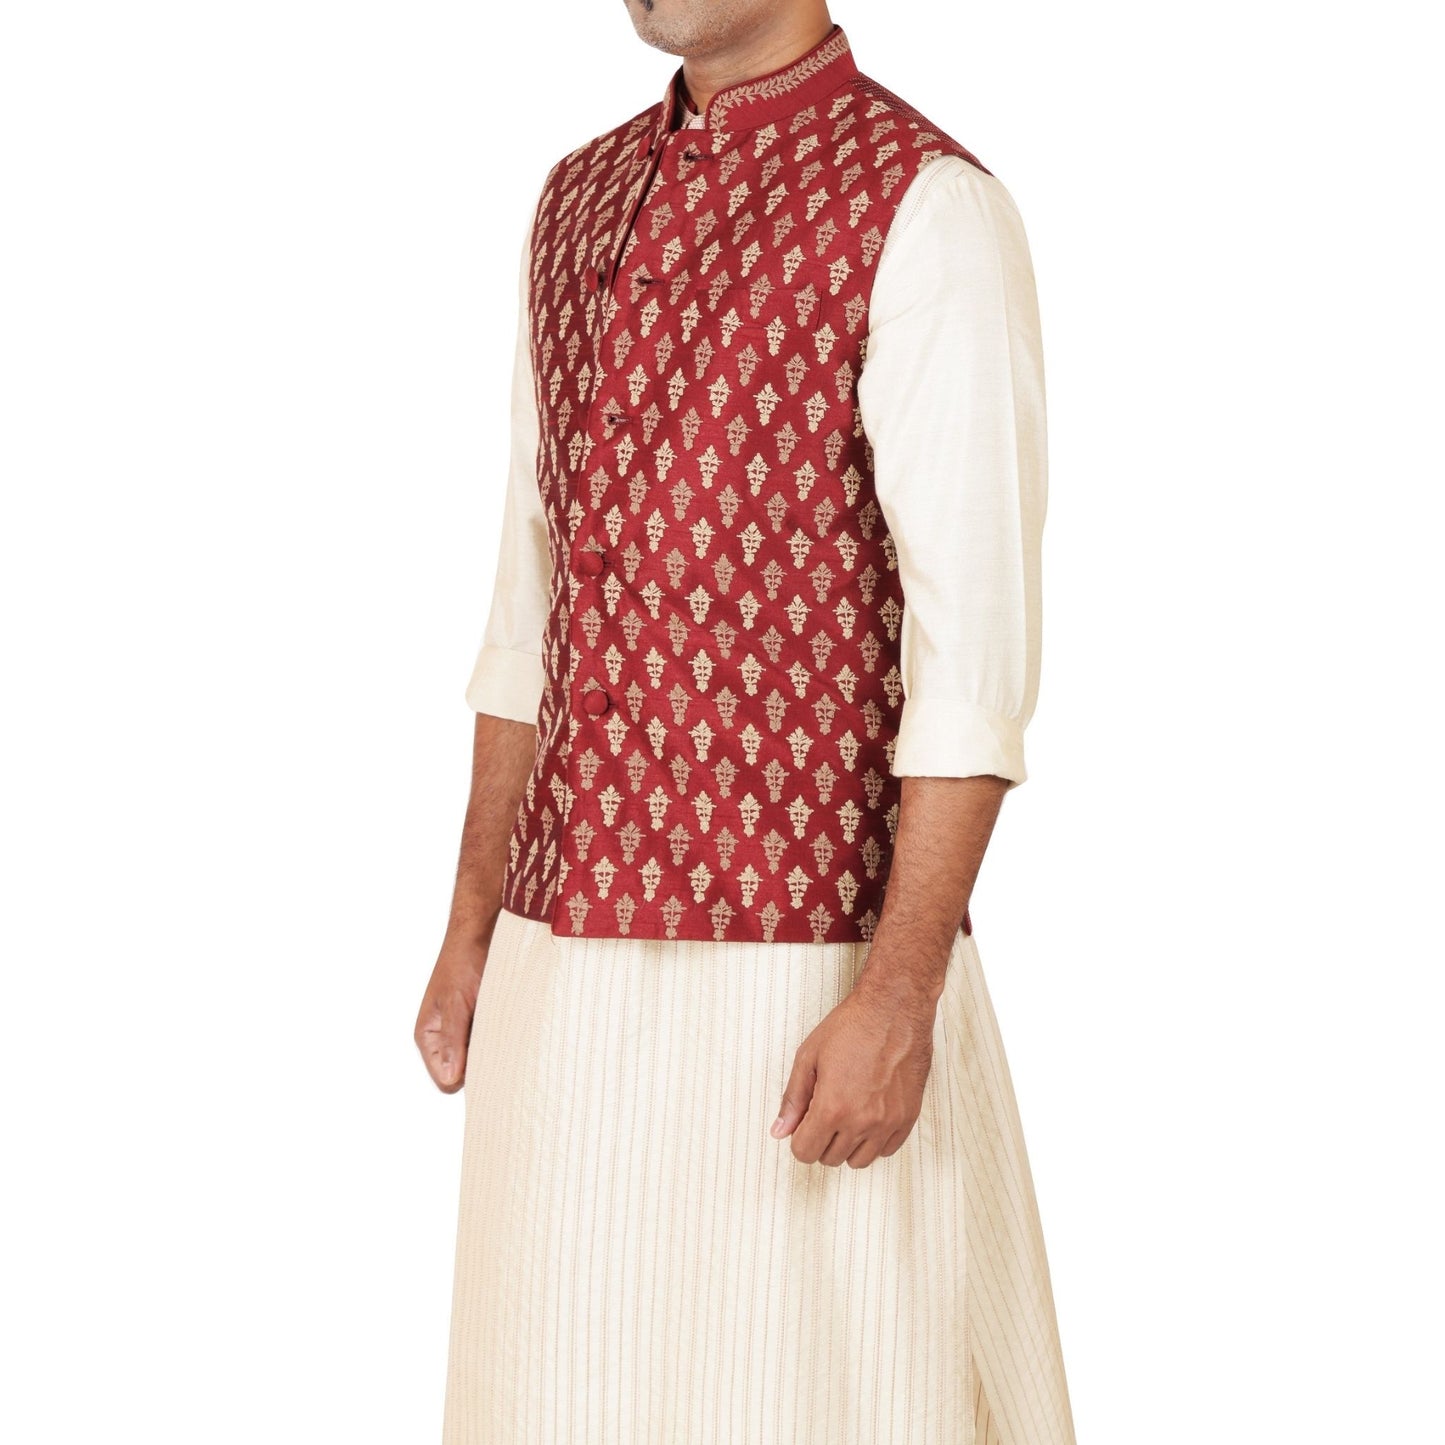 Sleeveless bandi with two tone embroidery